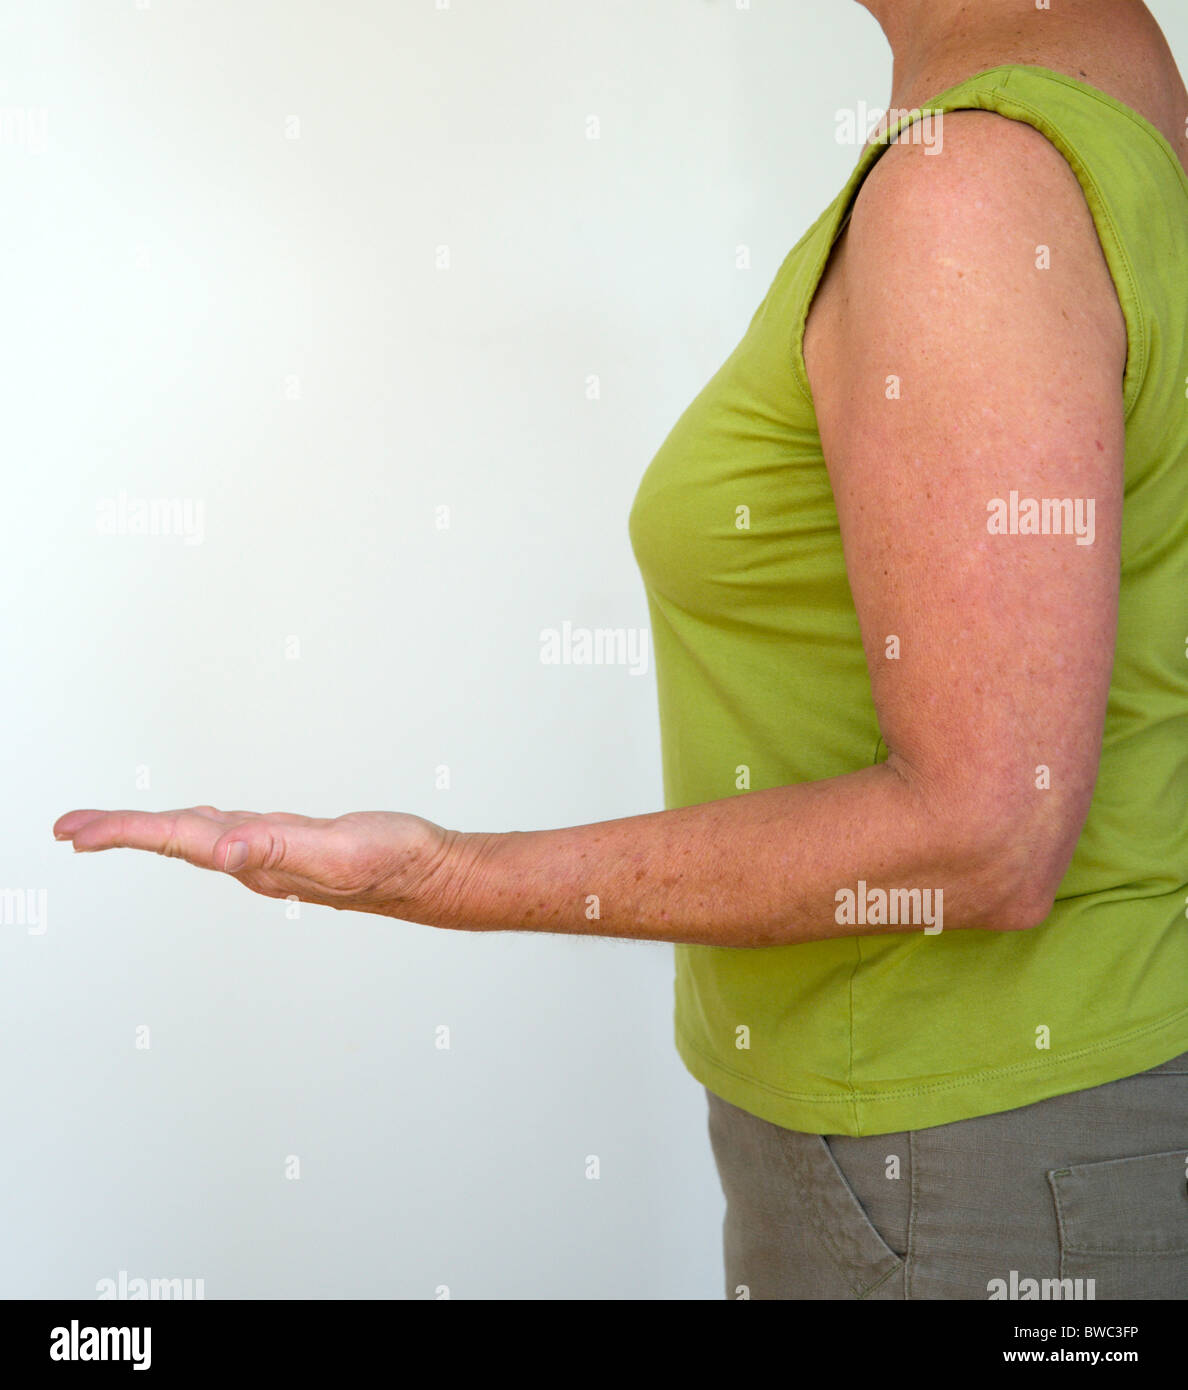 Health, Body, Arms, Woman in profile from side with arm bent at elbow with palm of hand facing upwards and fingers outstretched. Stock Photo